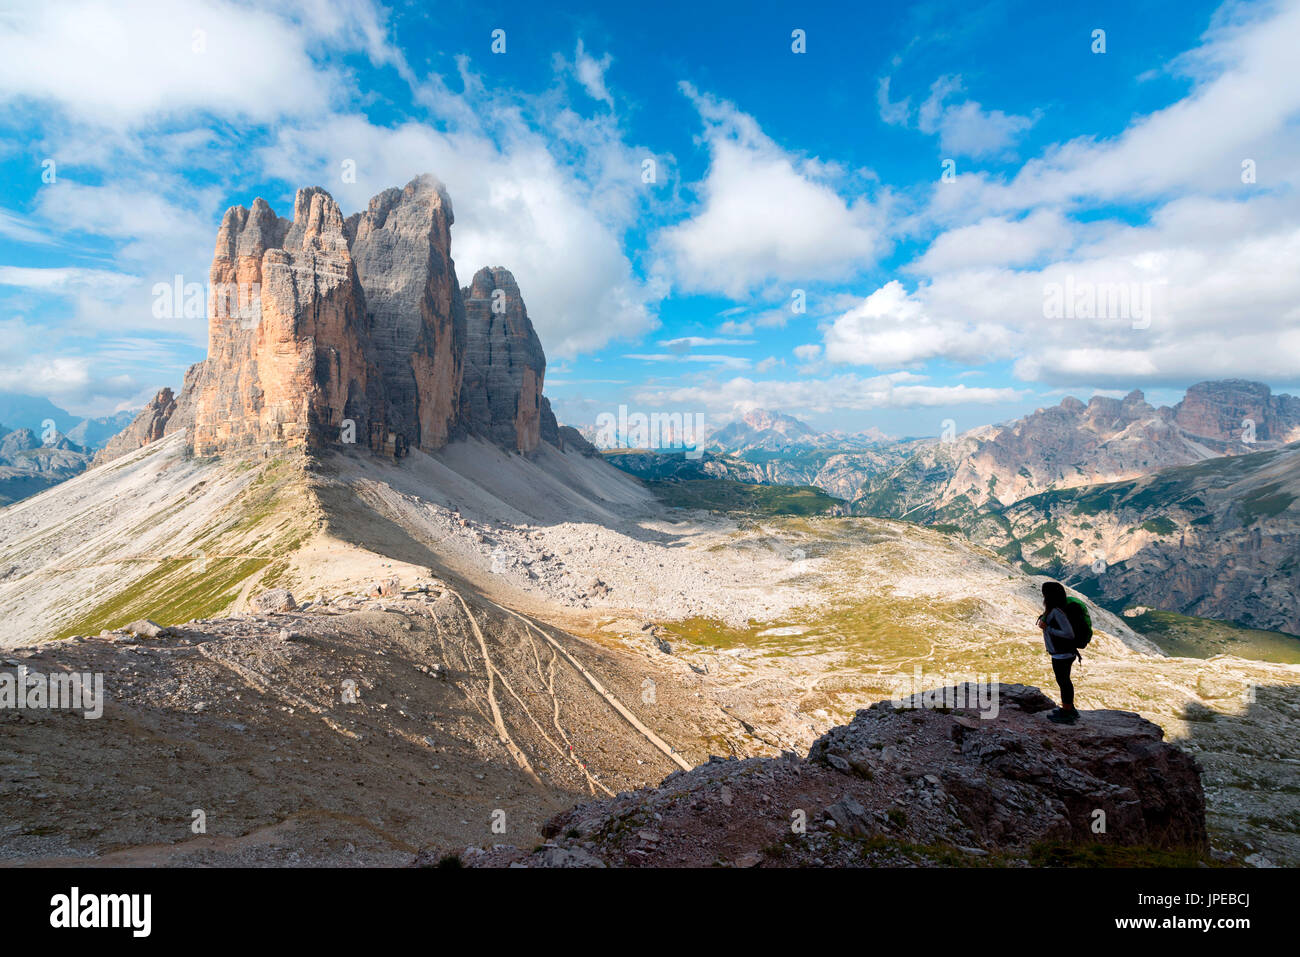 Europe, Italy, Dolomites, Veneto, Belluno. Woman hiker admire Tre Cime di Lavaredo from Trenches of the First World War on Mount Paterno Stock Photo